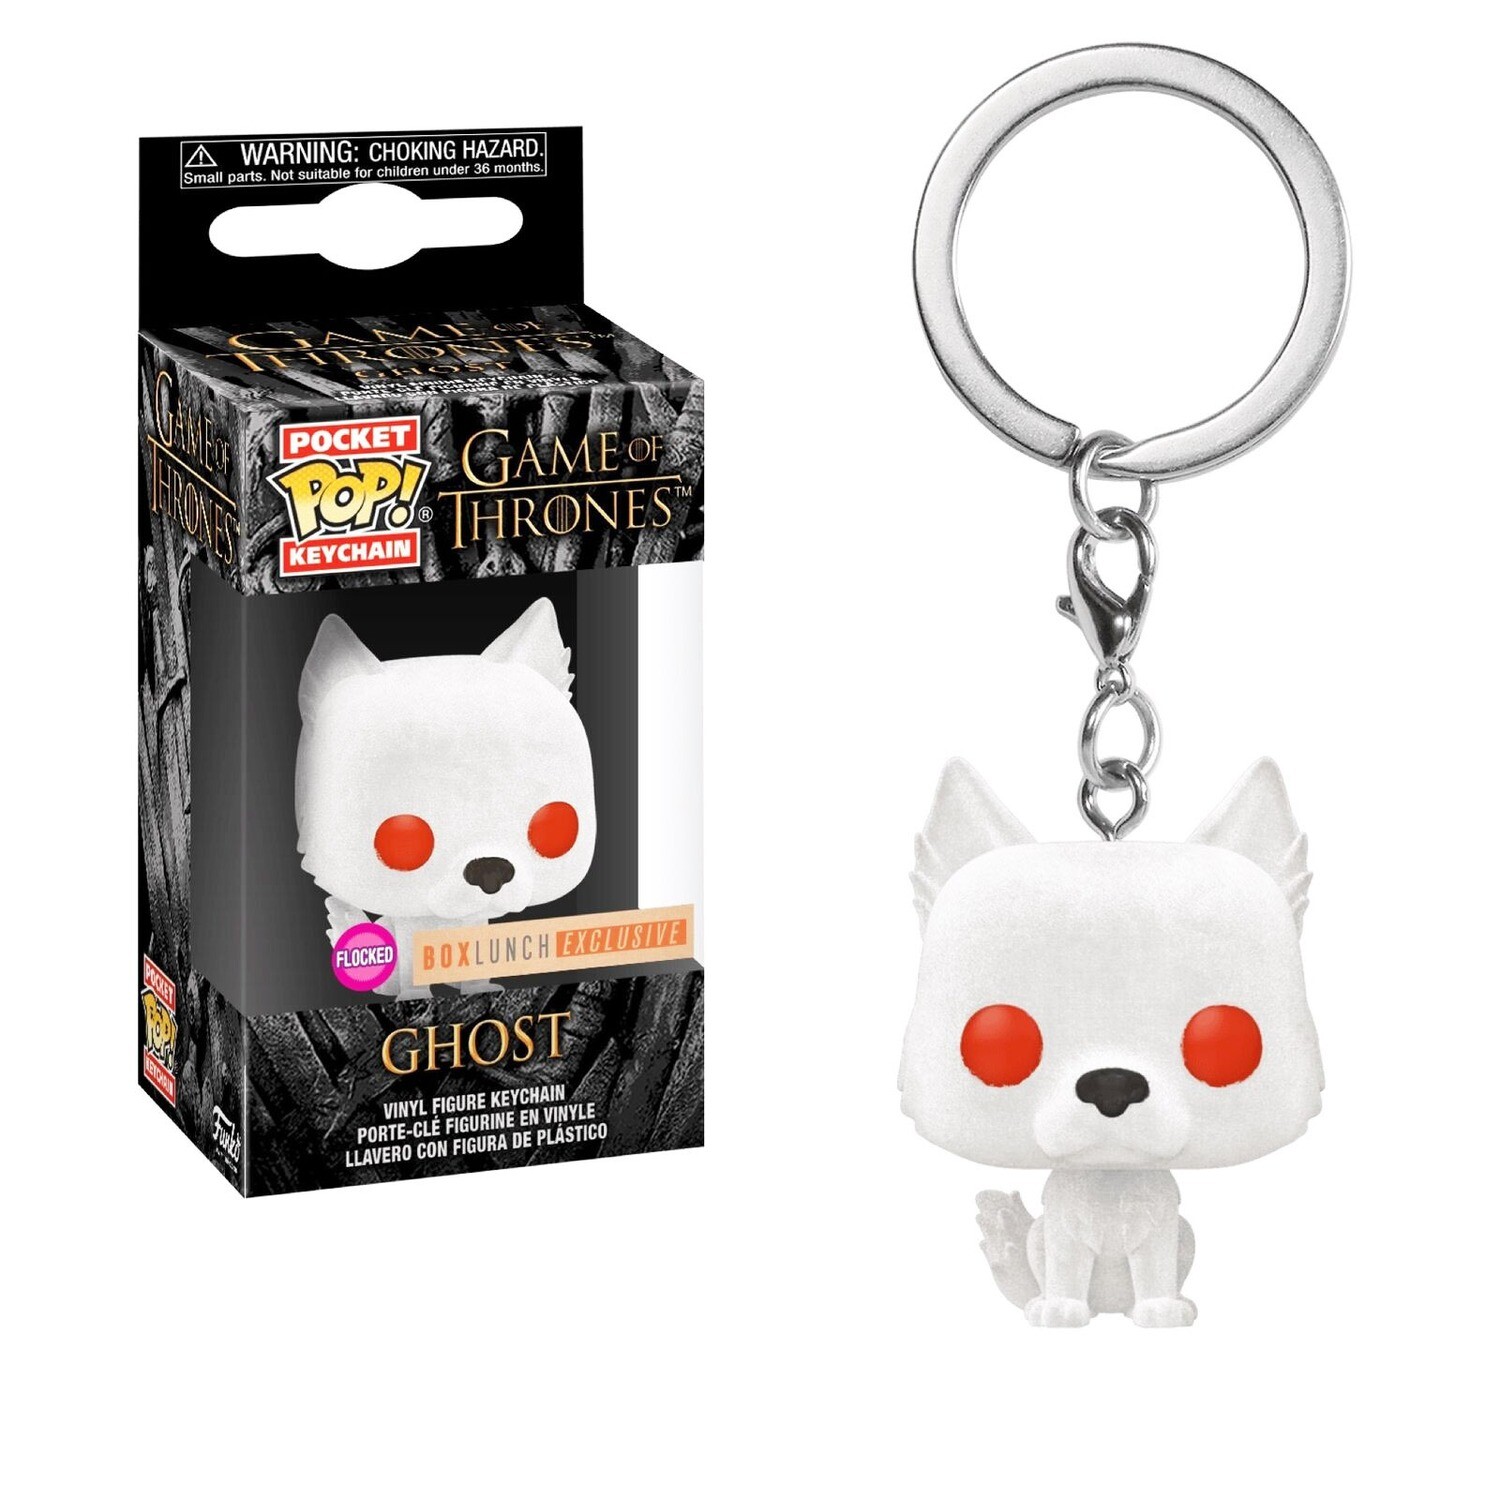 Ghost (Flocked) Game of Thrones Funko Pocket Pop Keychain BoxLunch Exclusive